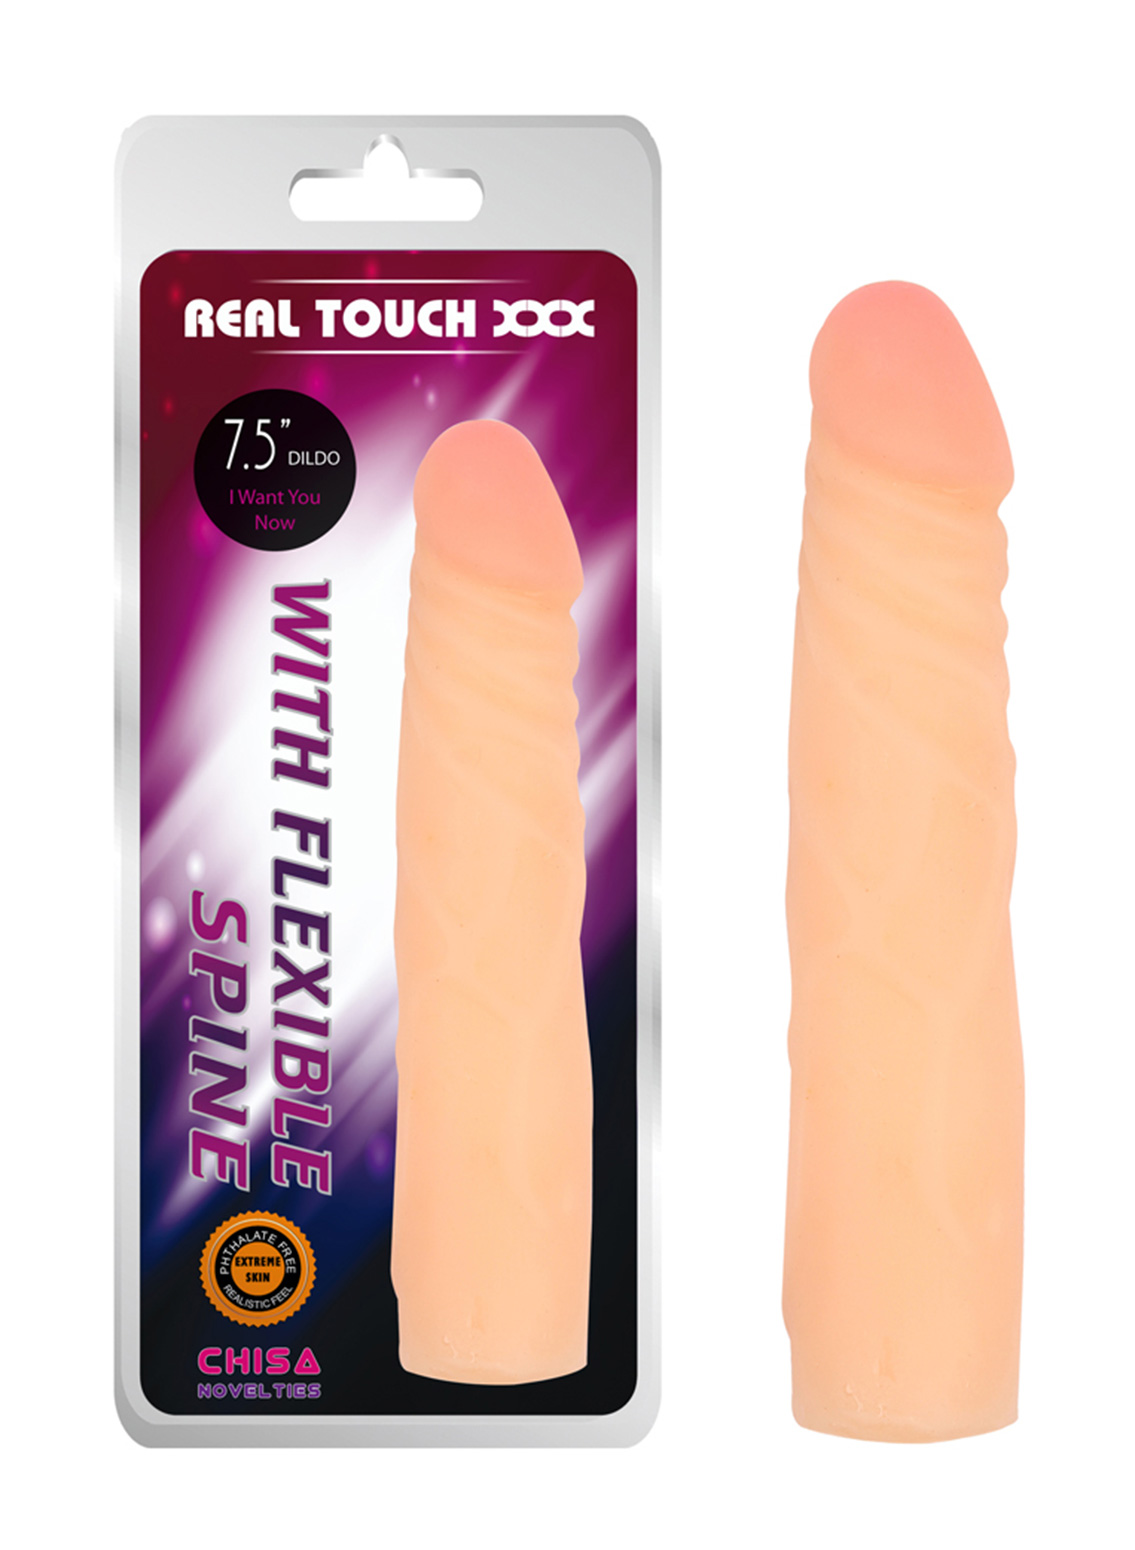 Chisa Novelties Real Touch XXX 7.5" Dildo With Flexible Spine